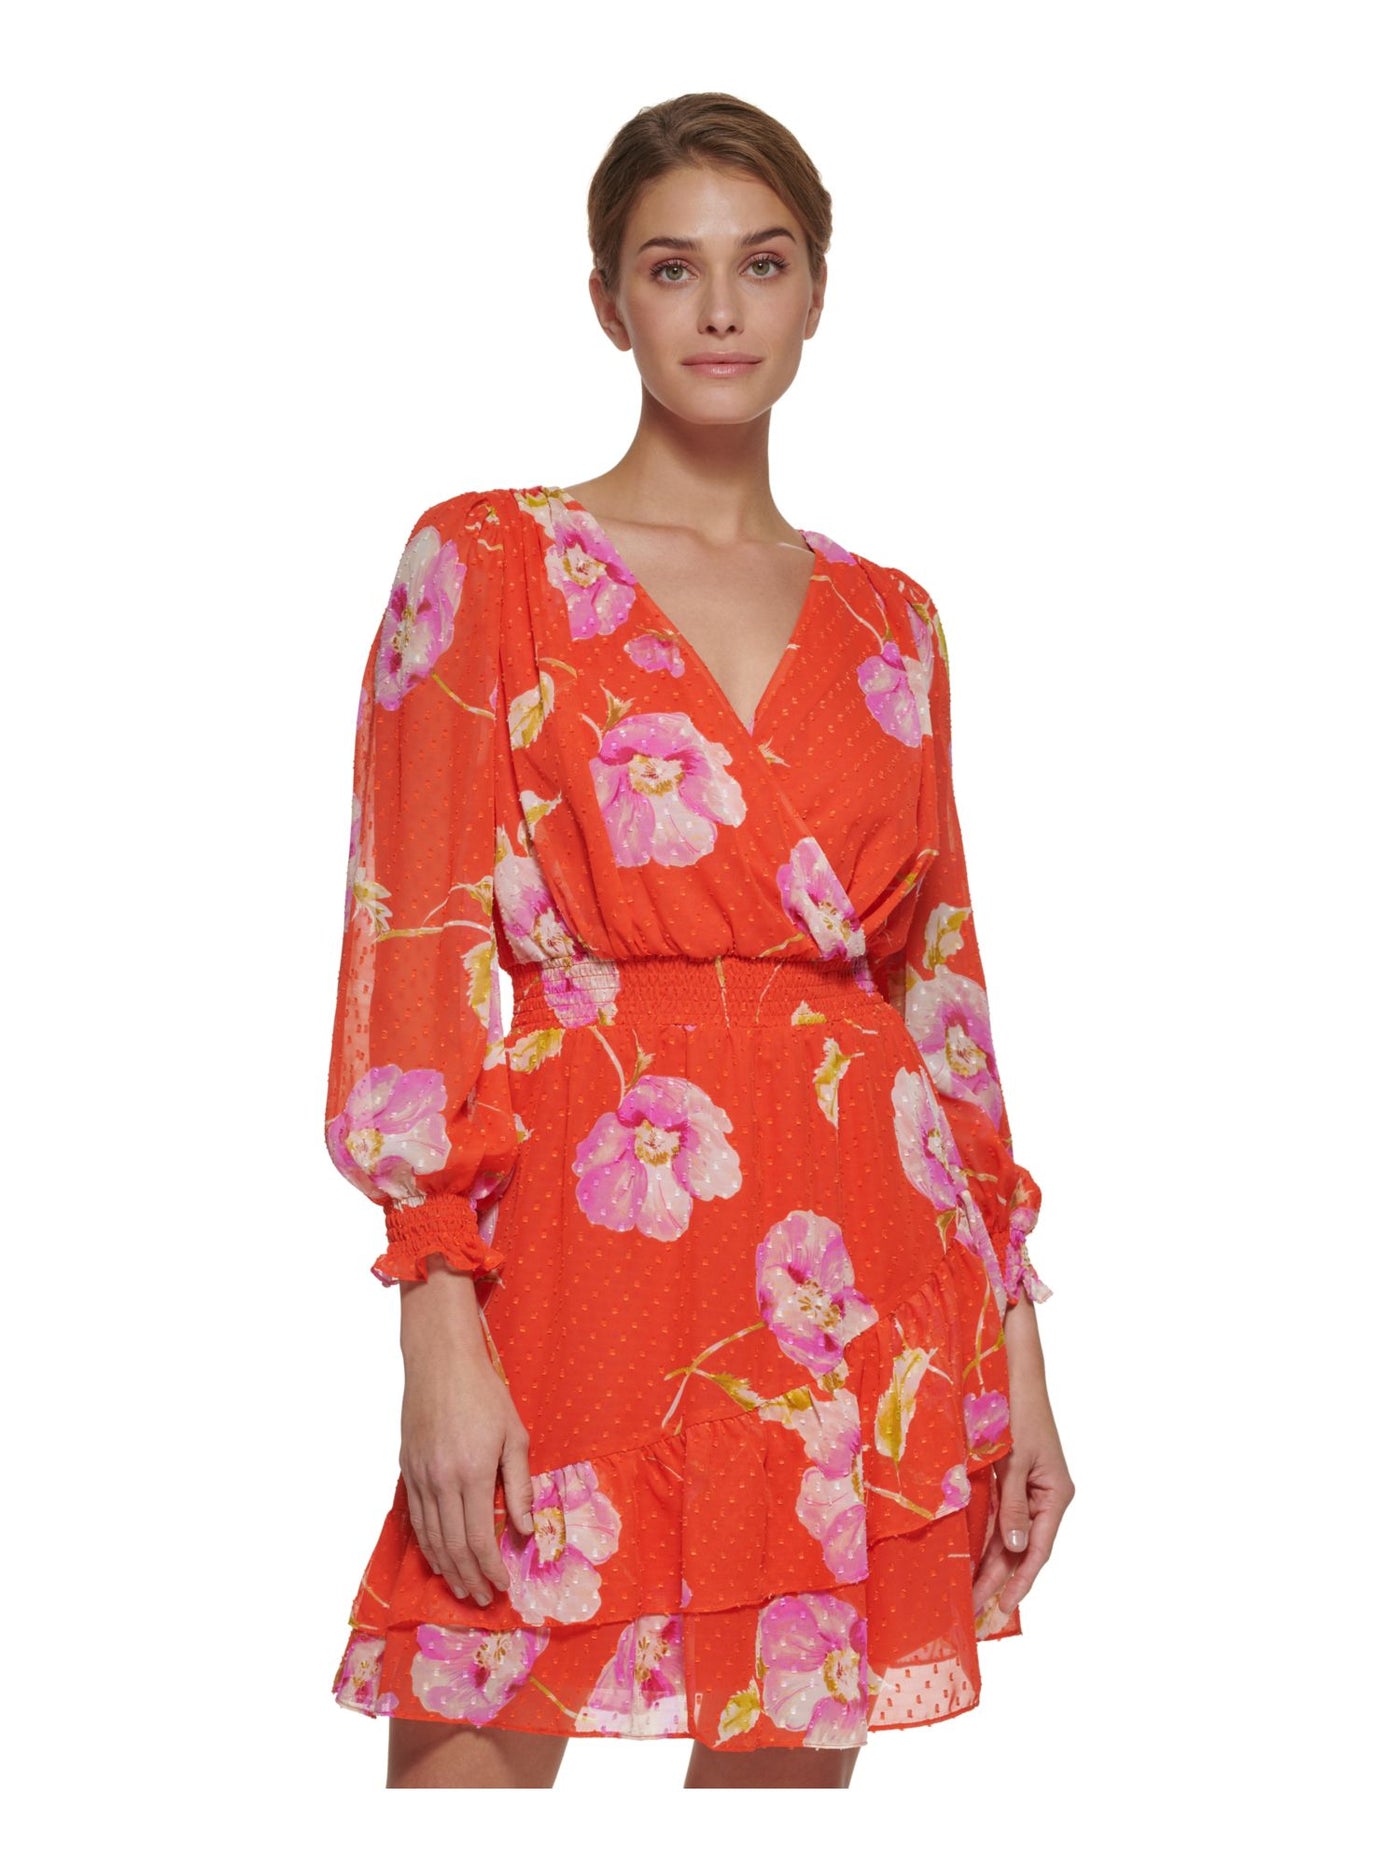 DKNY Womens Orange Zippered Smocked Tiered Skirt Lined Floral 3/4 Sleeve V Neck Short Party Fit + Flare Dress 10